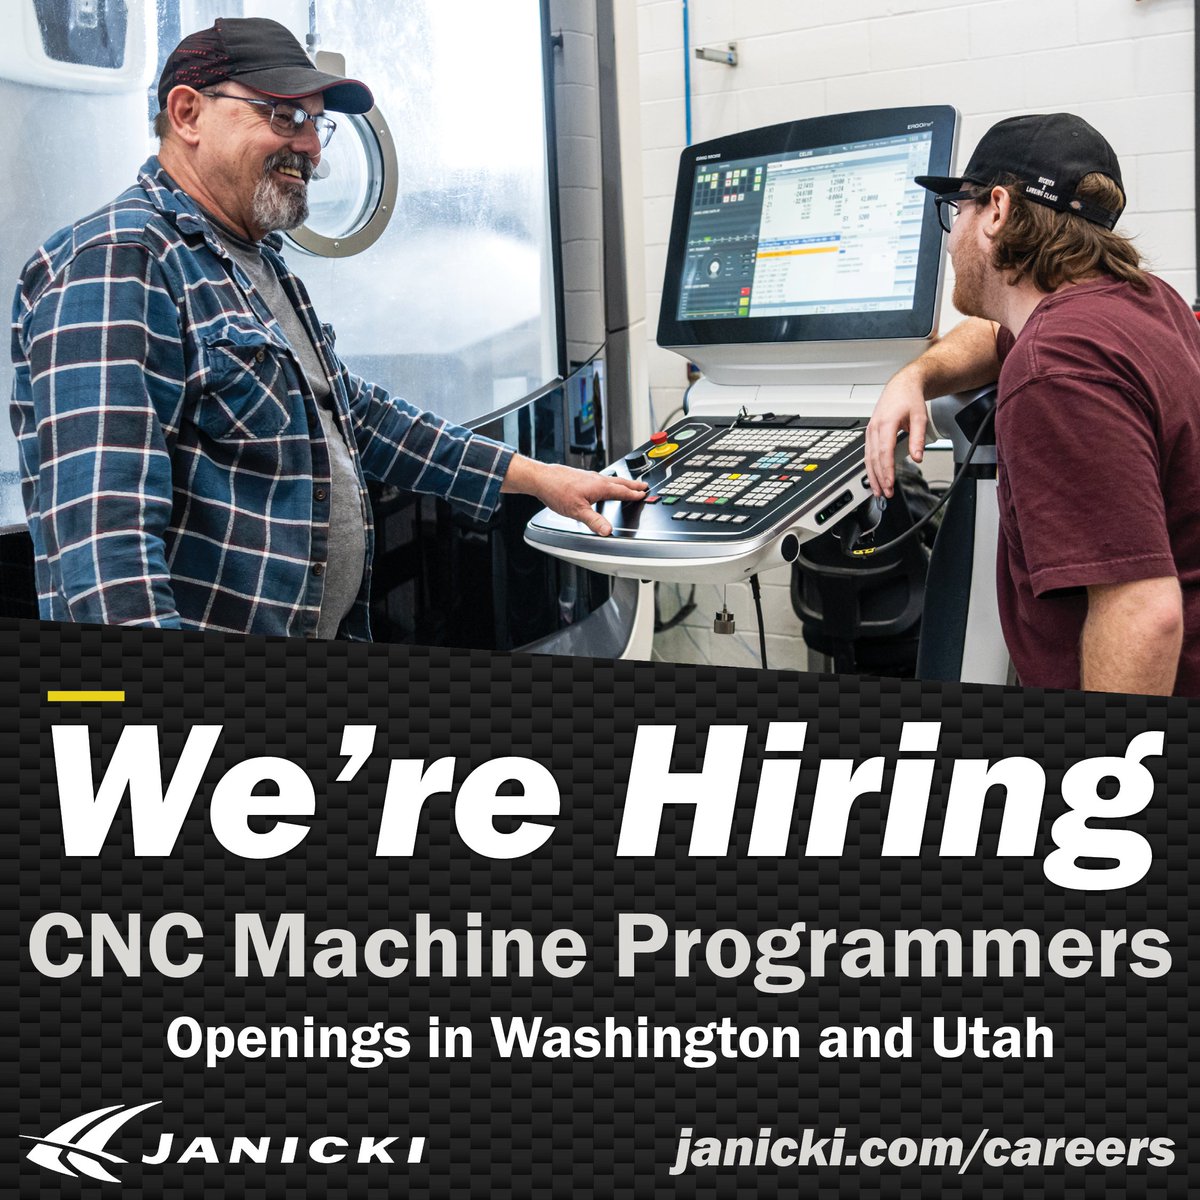 Janicki is seeking talented CNC Machine Programmers to join our teams in Washington and Utah.

Ready to take your career to the next level? 🚀Apply now:
janicki.com/careers

#NCProgrammer #CNCJobs #Machinist #Careers #HiringNow #WAjobs #UTjobs